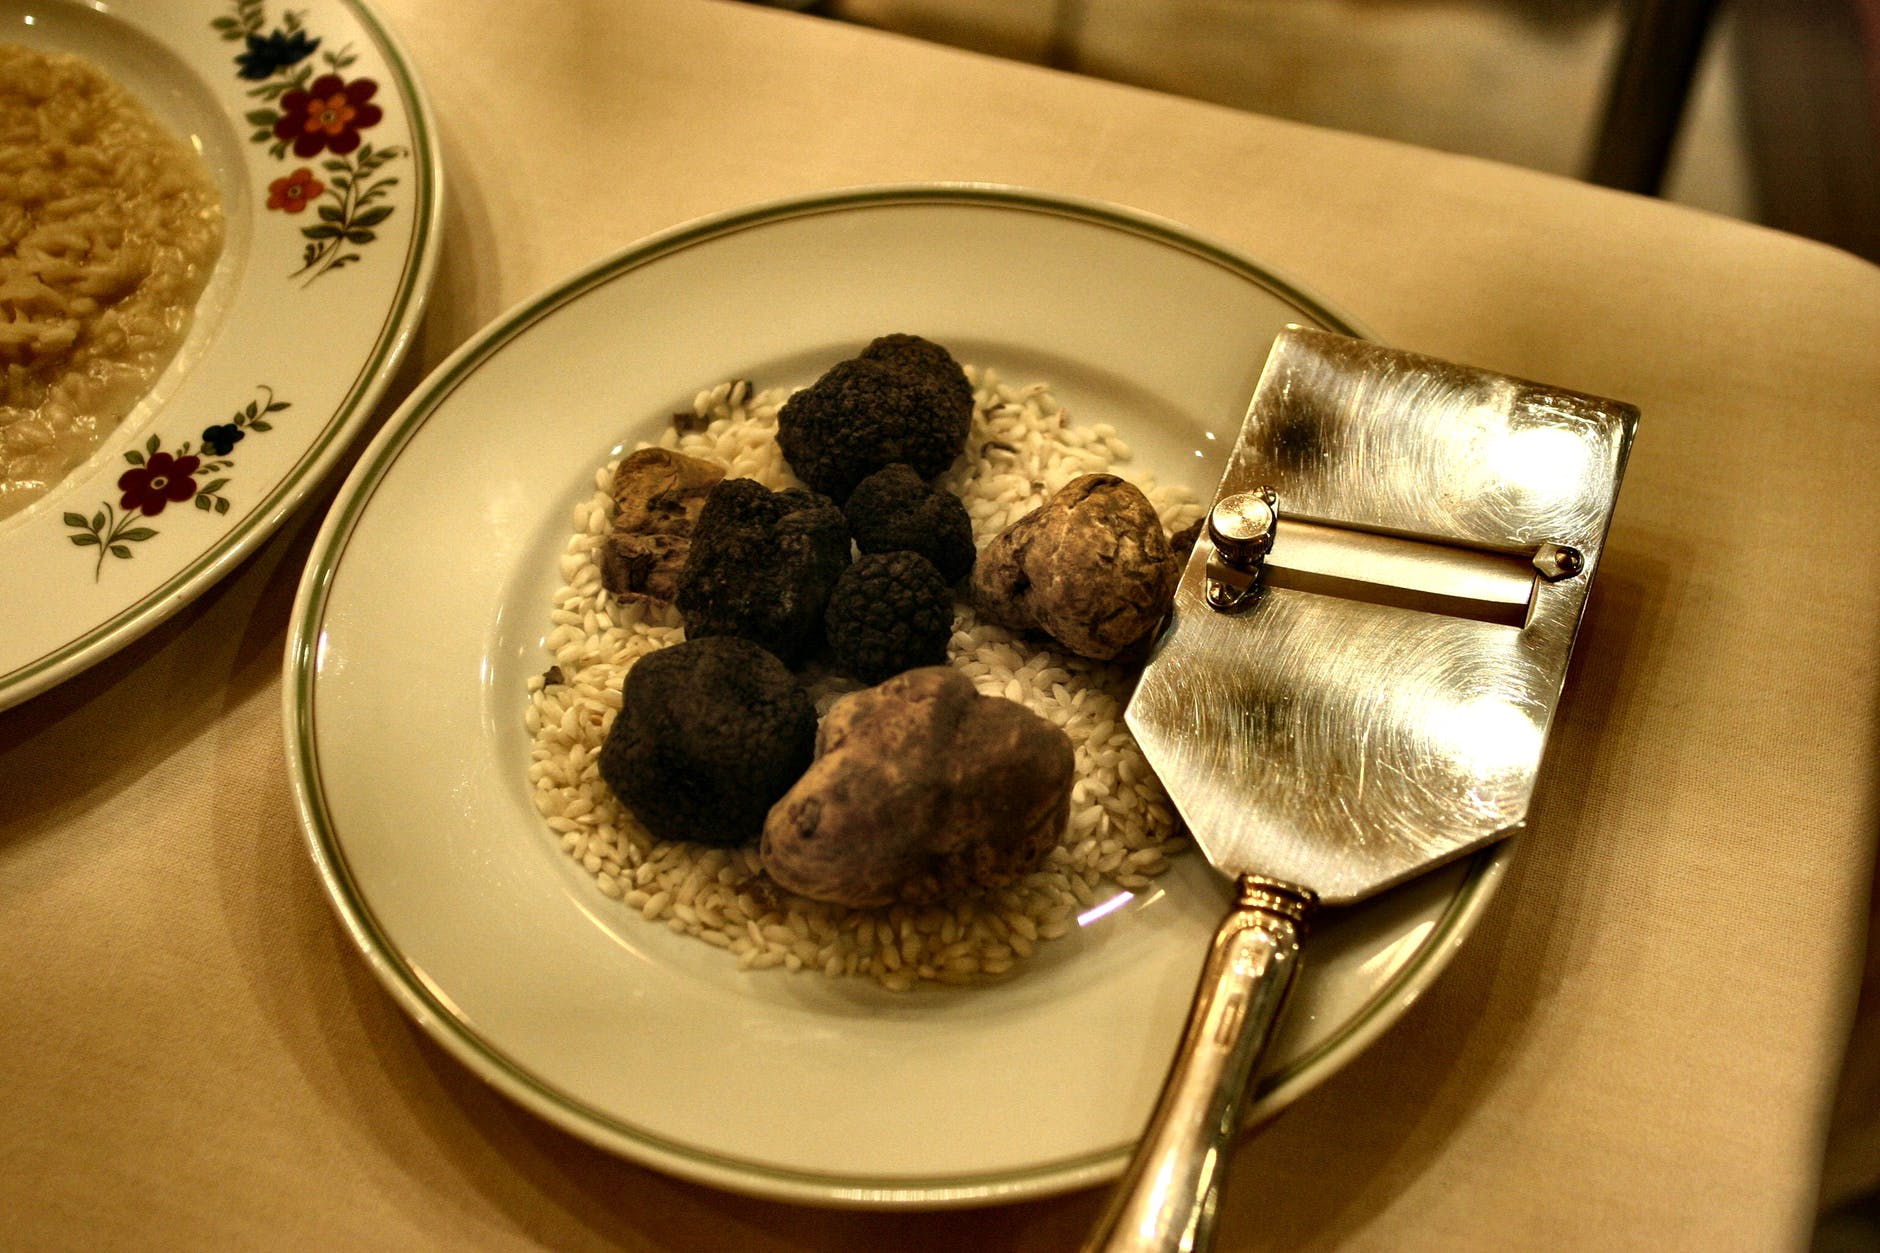 Why Are Truffles So Expensive?